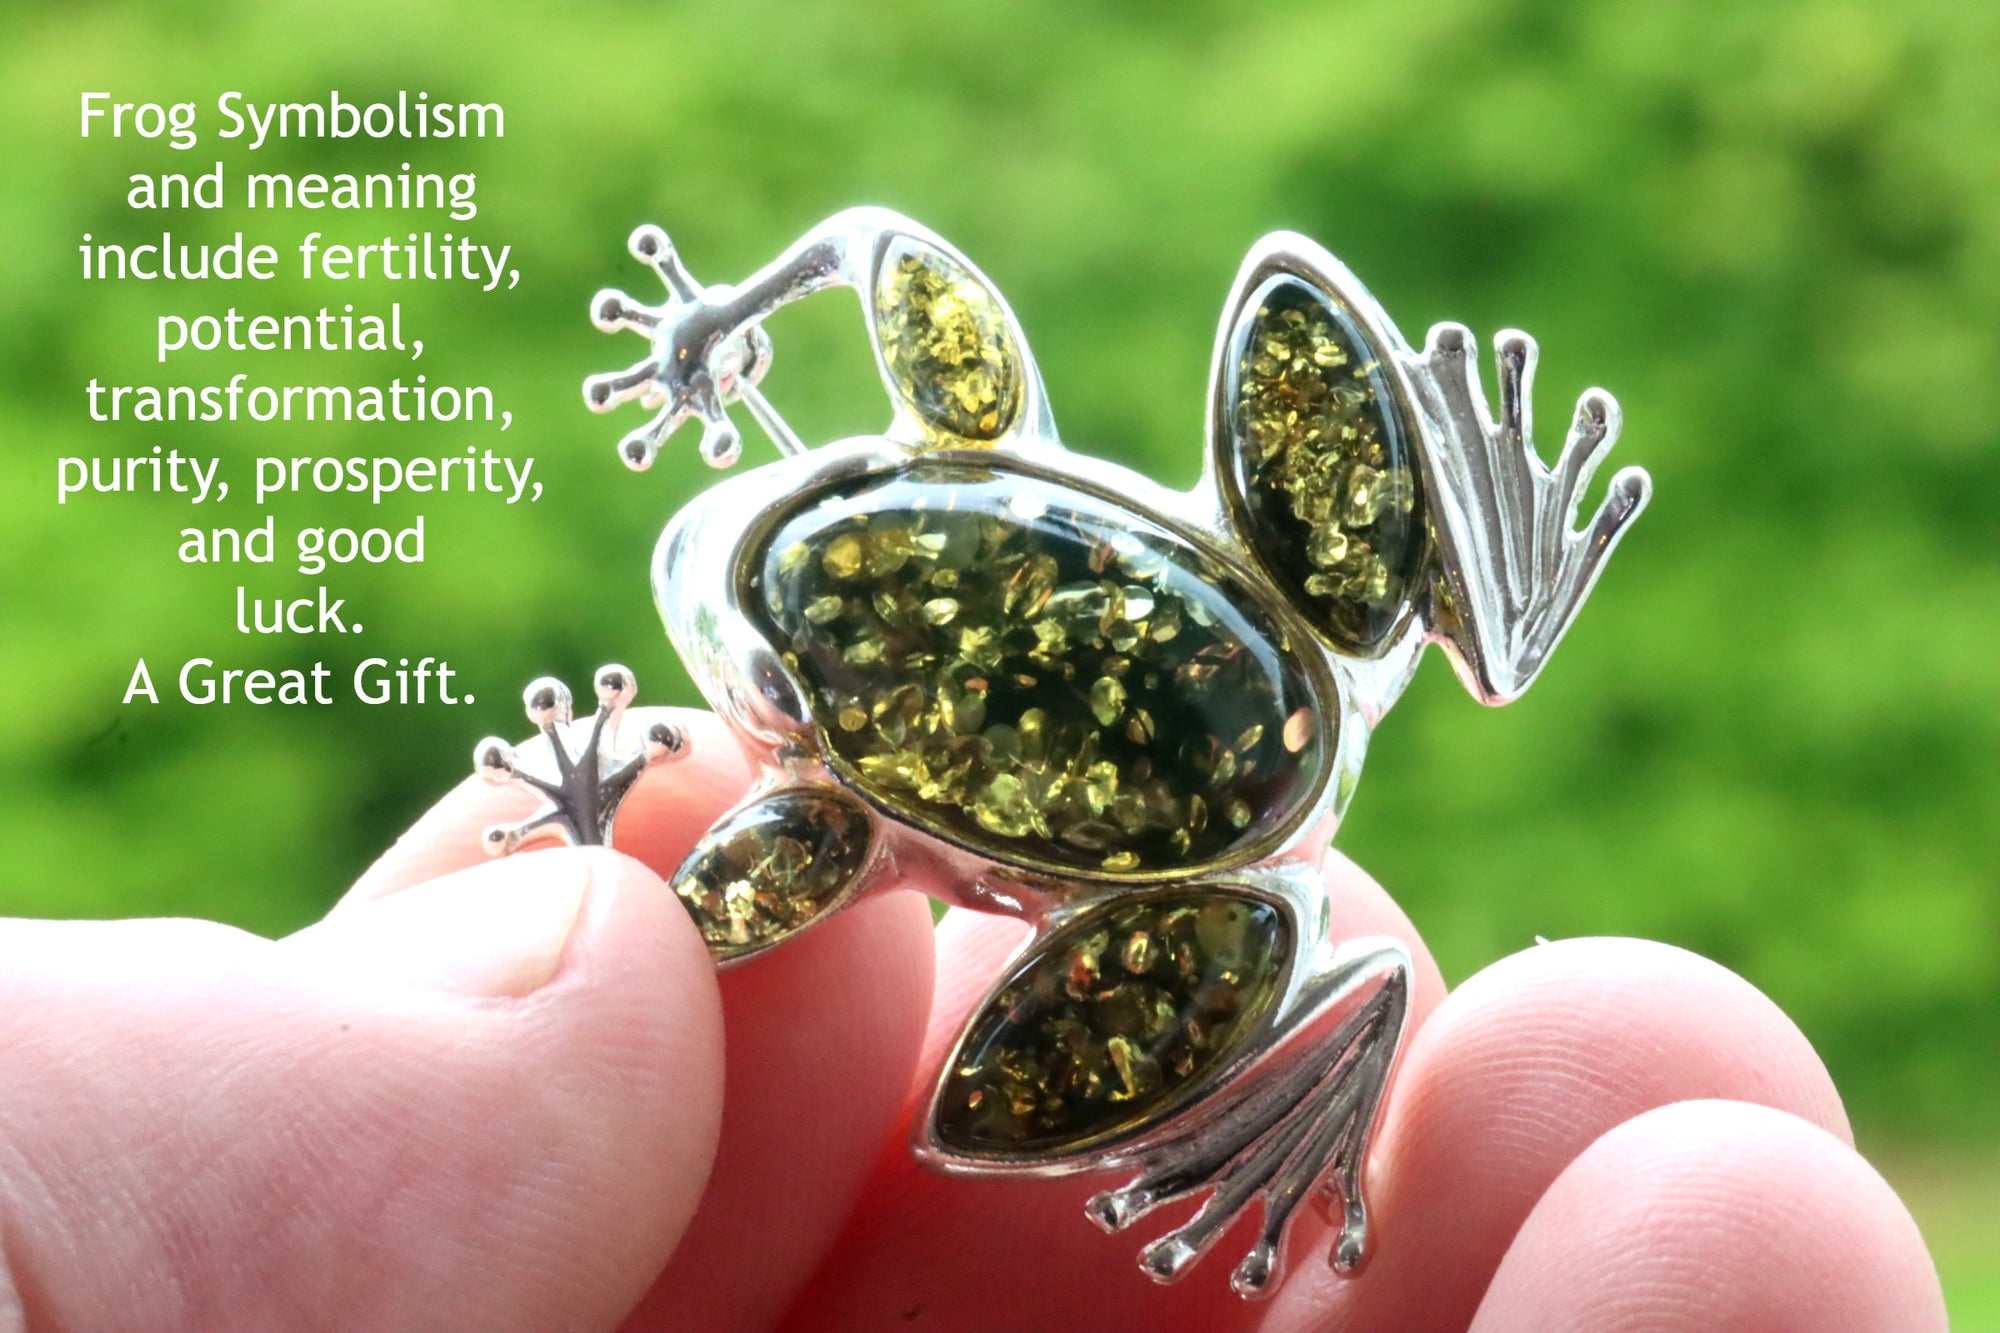 Gift 925 Silver Frog Baltic Amber Brooch.